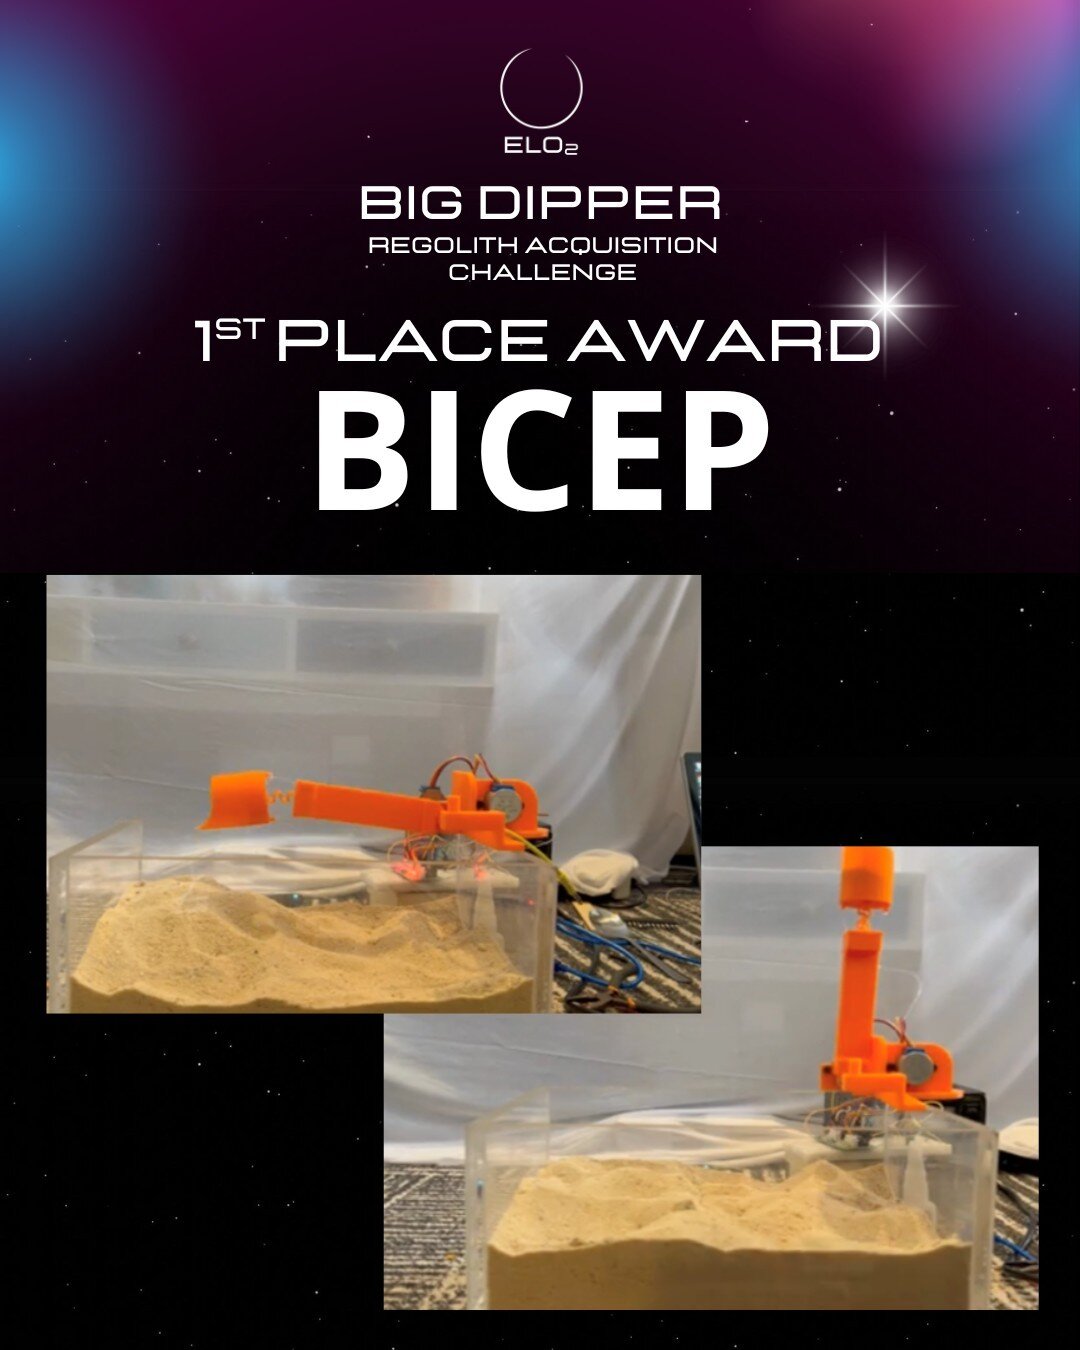 Congratulations to one of three @ELO2.au Big Dipper Challenge 1st Place Winners &ndash; BICEP! ⁠
⁠
Winning designs were judged on creativity, functionality, durability, scalability, and evidence of design optimisation. The Biomechanically Inspired Co